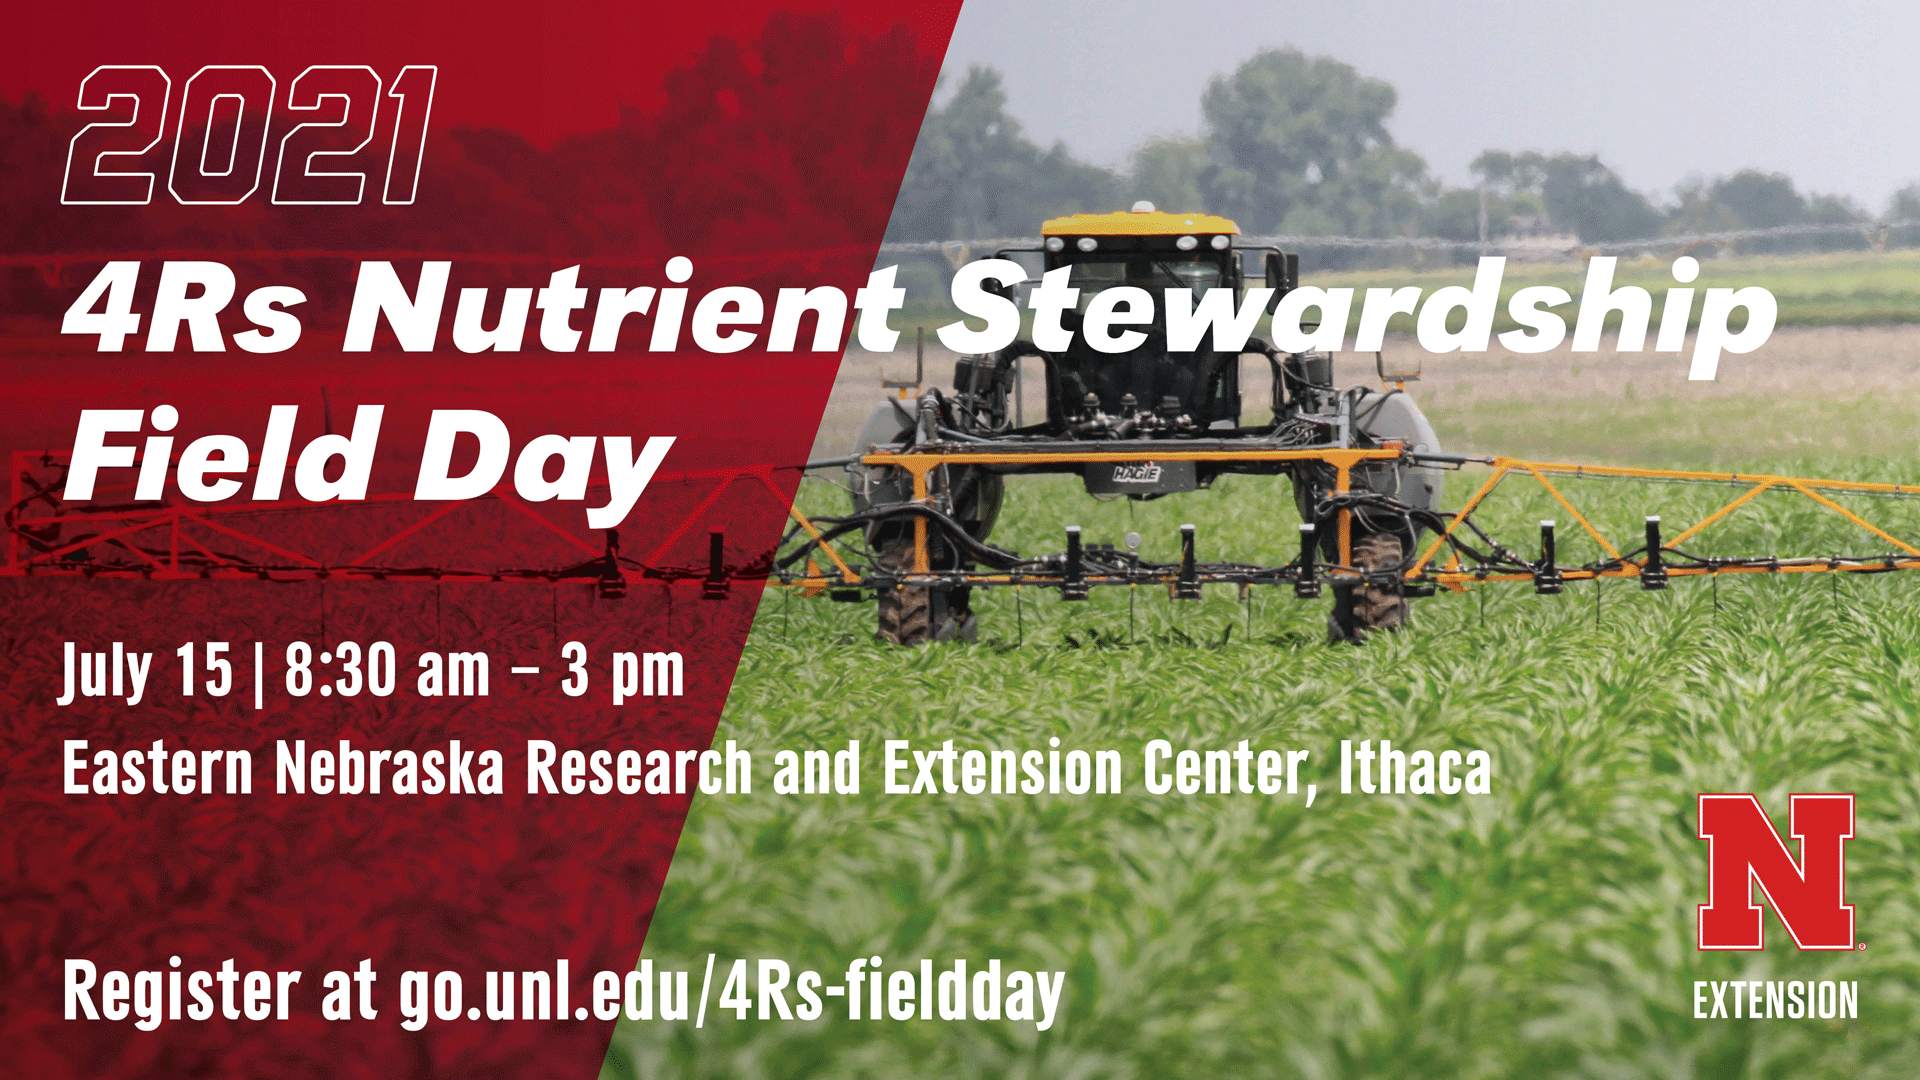 Nebraska Extension is holding the inaugural Nebraska 4Rs Nutrient Stewardship Field Day July 15 at the Eastern Nebraska Research and Extension Center.